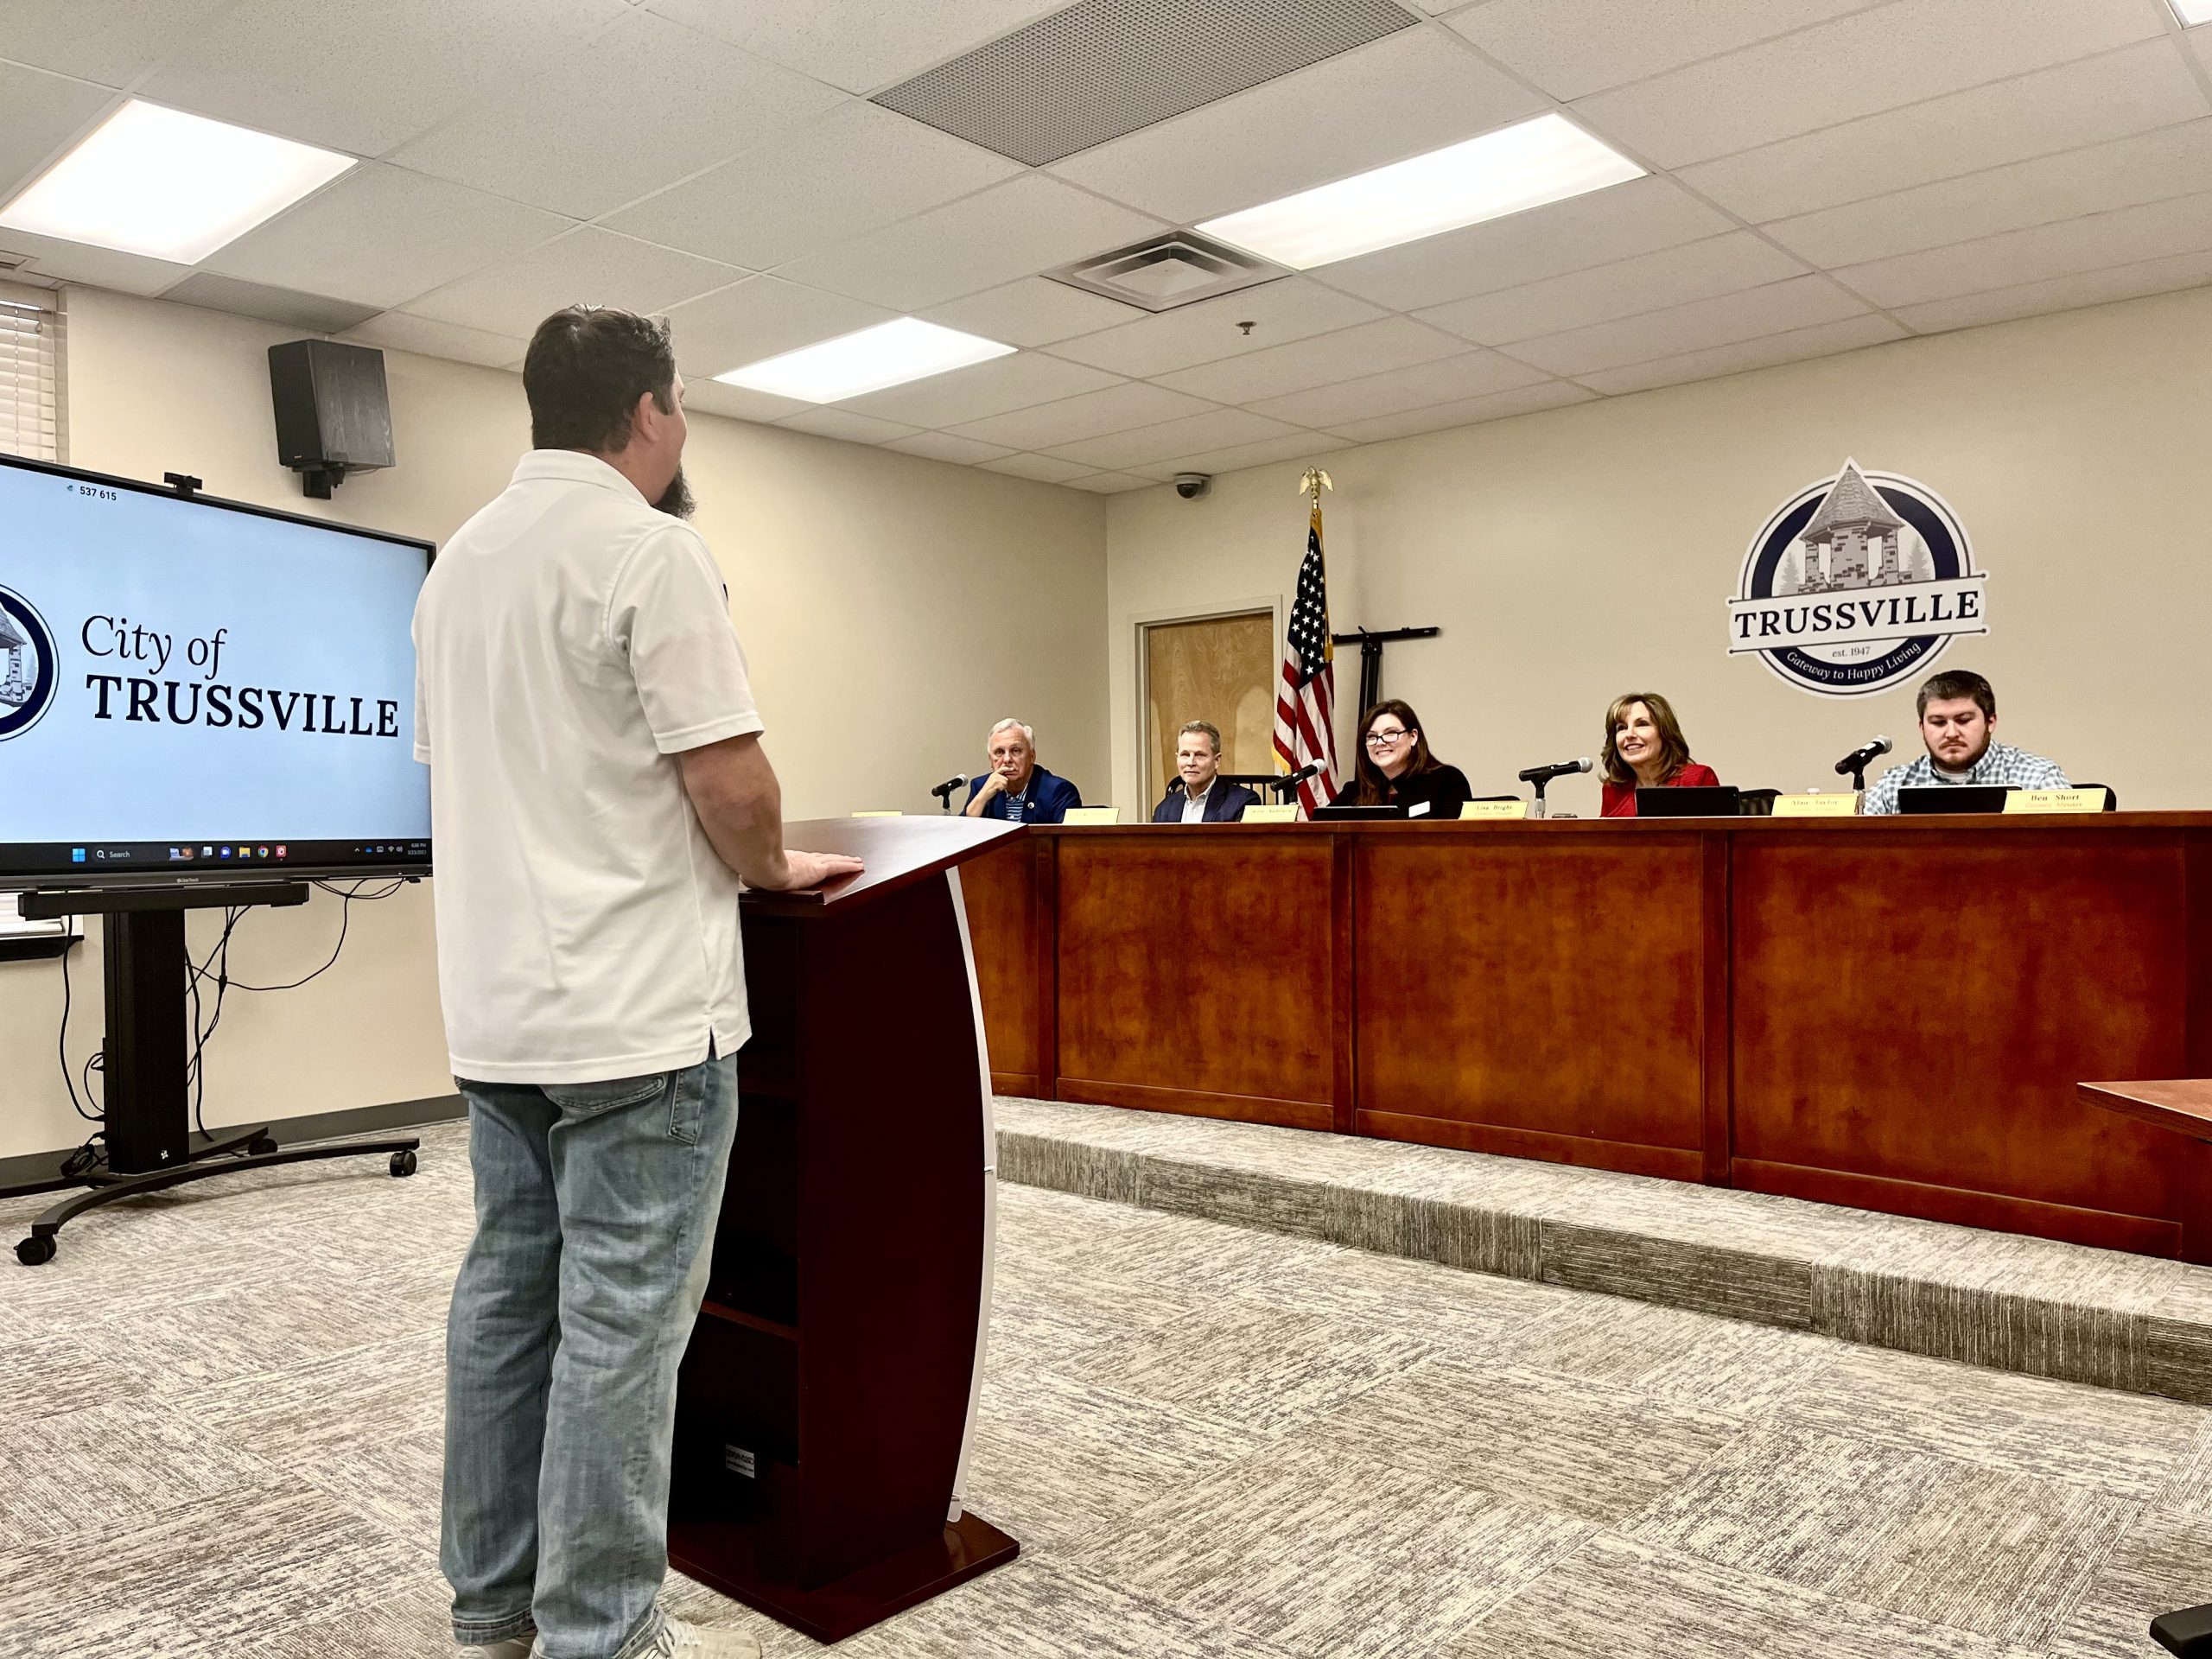 Trussville City Council approves multiple proclamations regarding upcoming citywide events